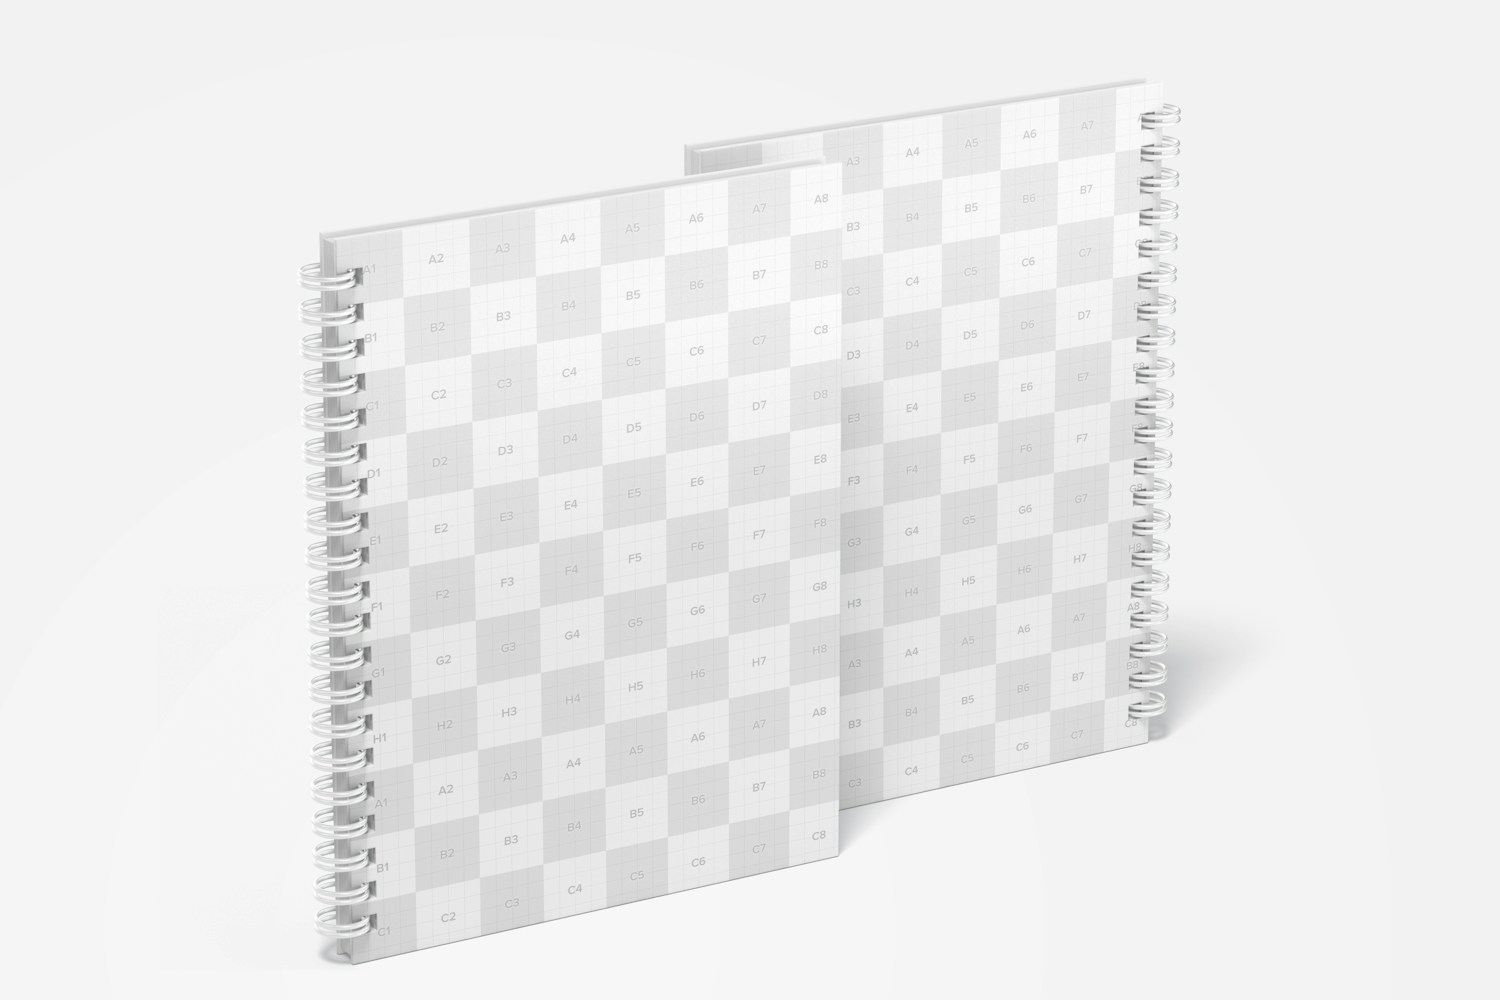 Plastic Cover Wire Bound Notepads Mockup